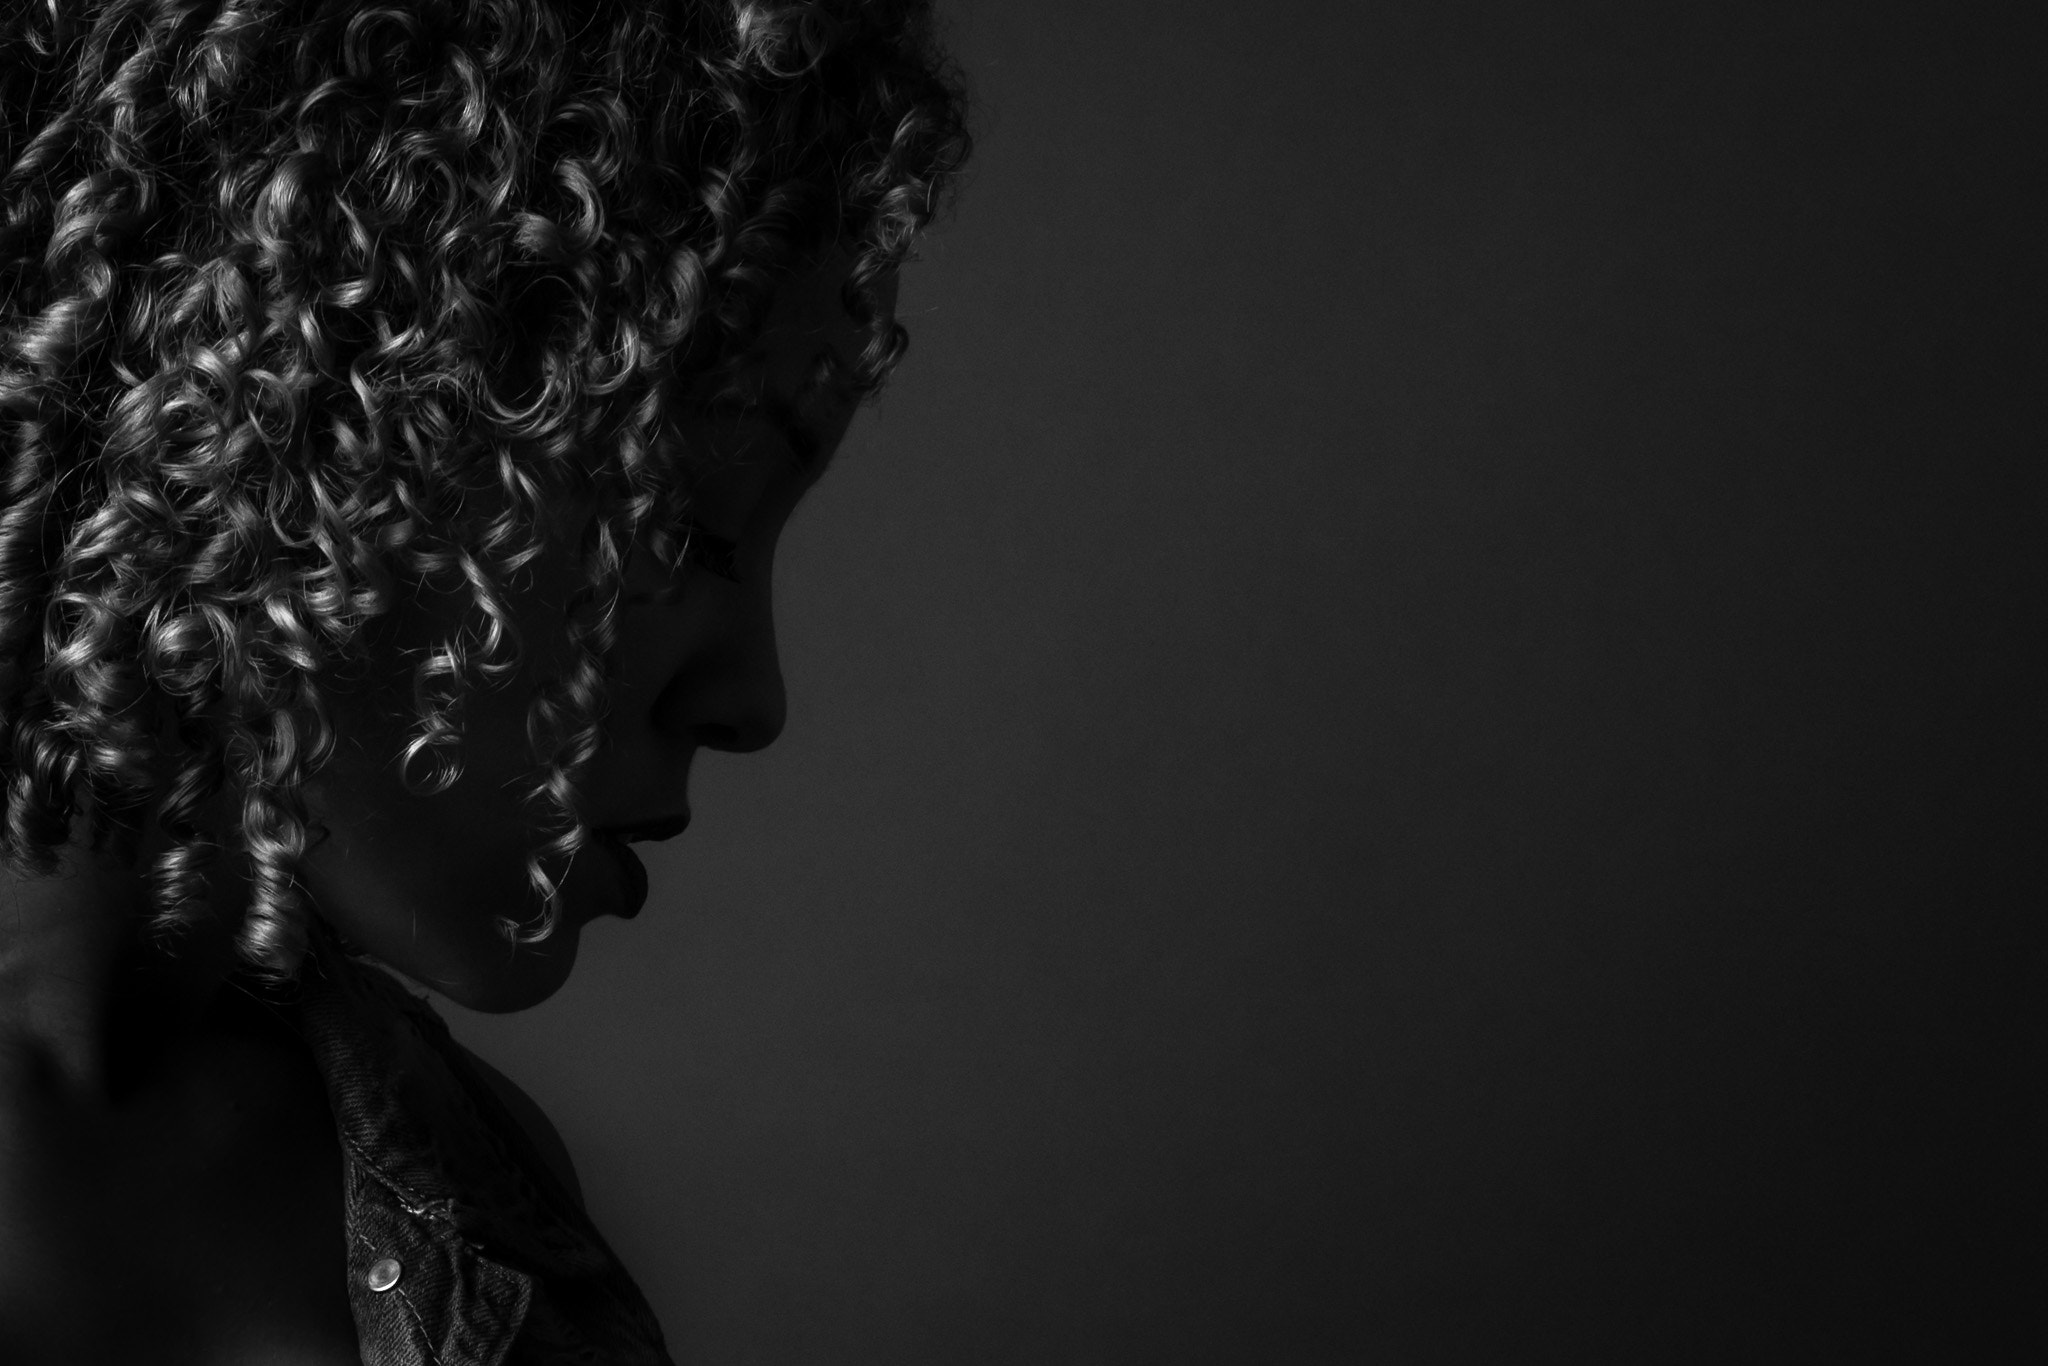 Sony a99 II sample photo. Lovely black and white profile with killer curls photography